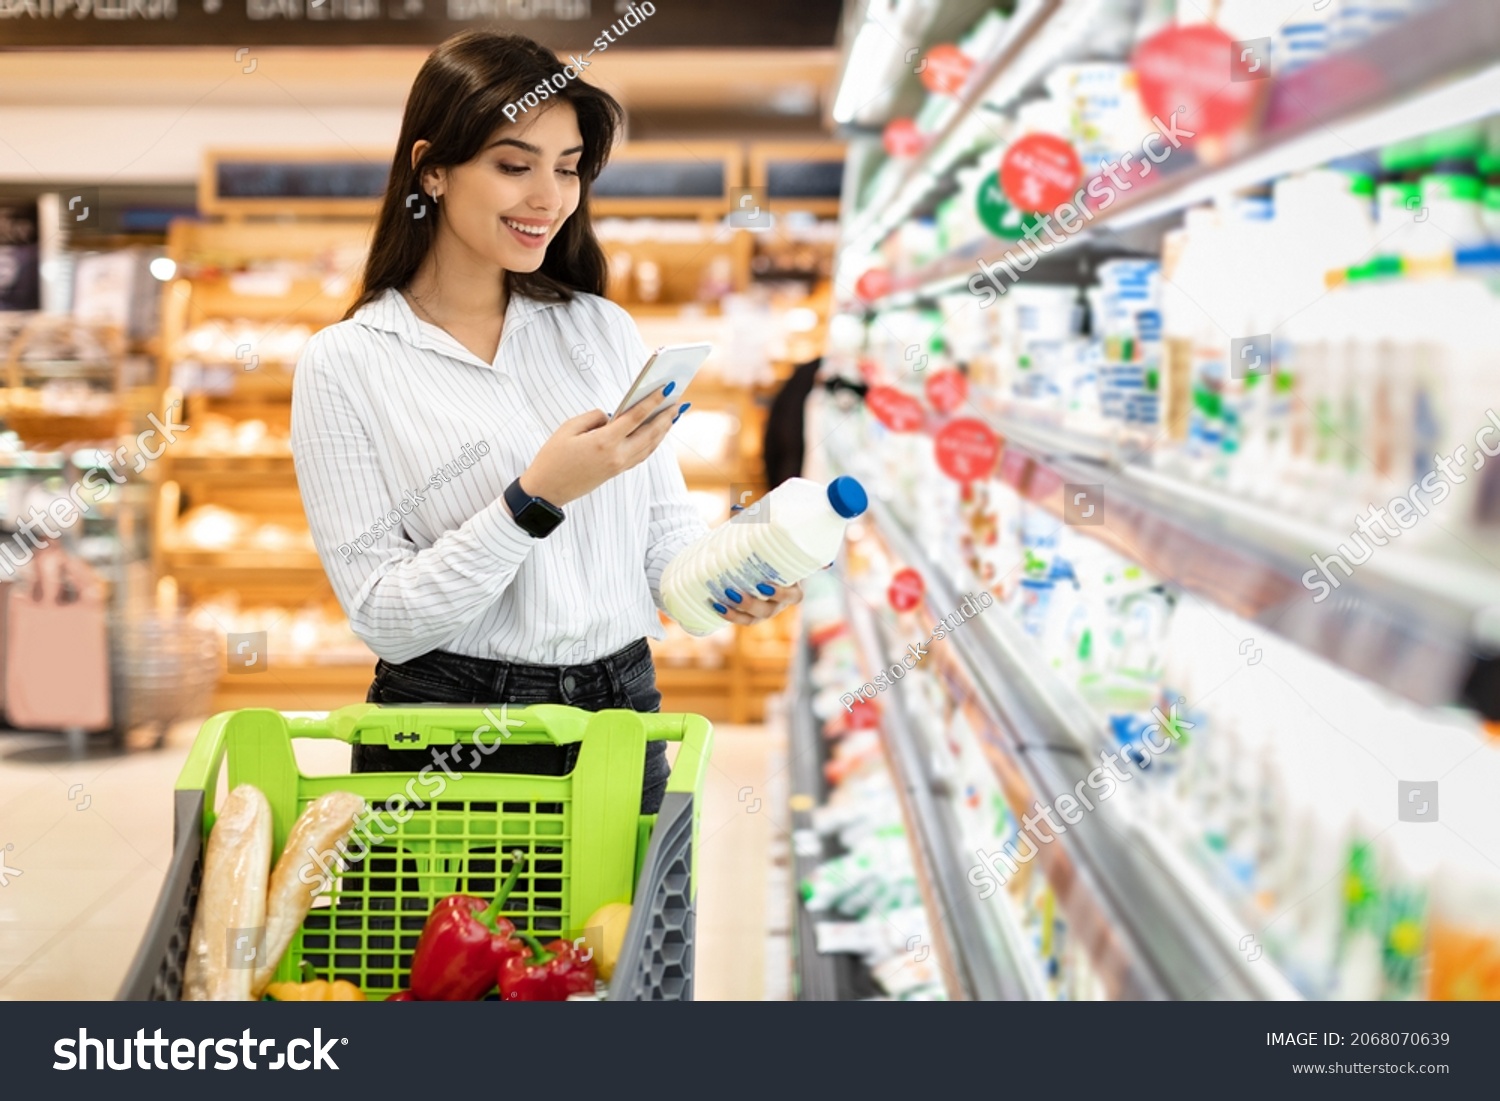 Middle Eastern Woman Using Phone Scanning Milk Bottle Doing Grocery Shopping In Supermarket, Standing With Shop Cart Full Of Products. Consumerism And Technologies, Customer's Application #2068070639